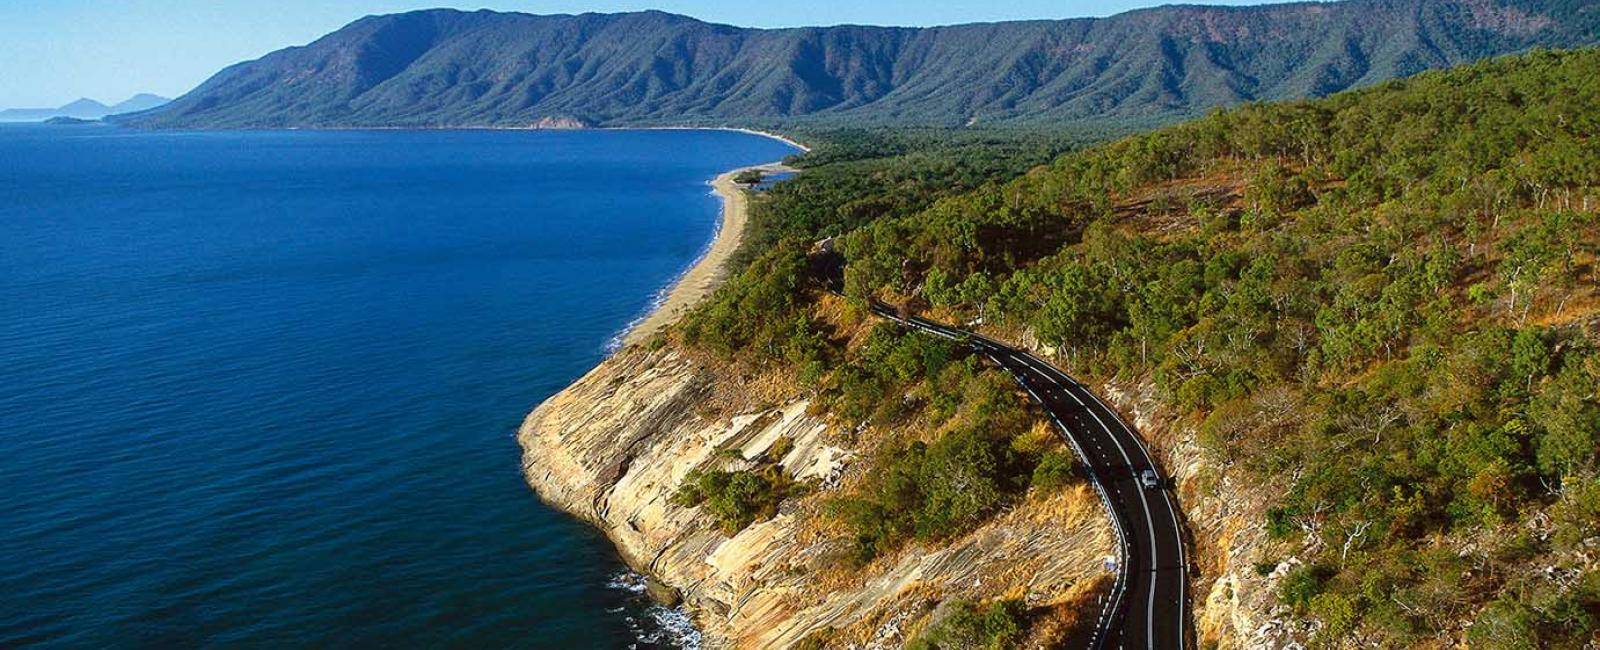 The Great Barrier Reef Drive | Reef to rainforest by road